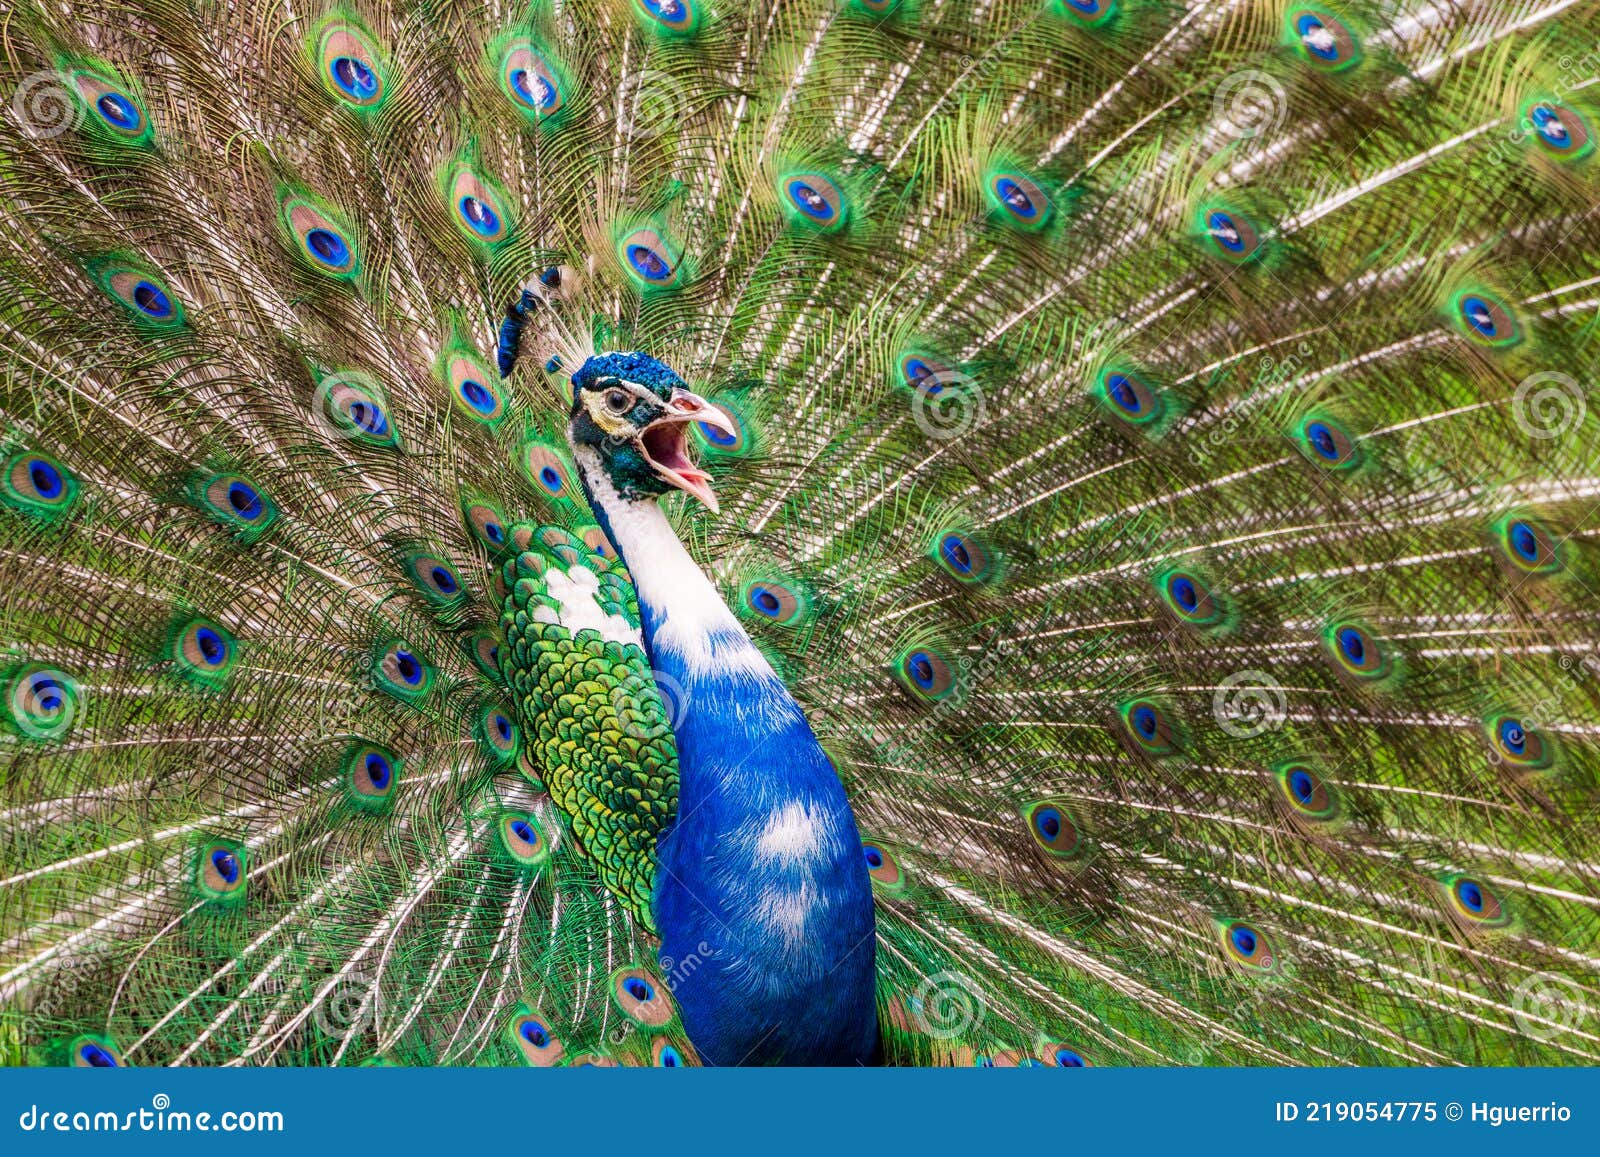 pied peacock / indian peafowl pavo cristatus with white coloring, calling and displaying tail feathers - florida, usa